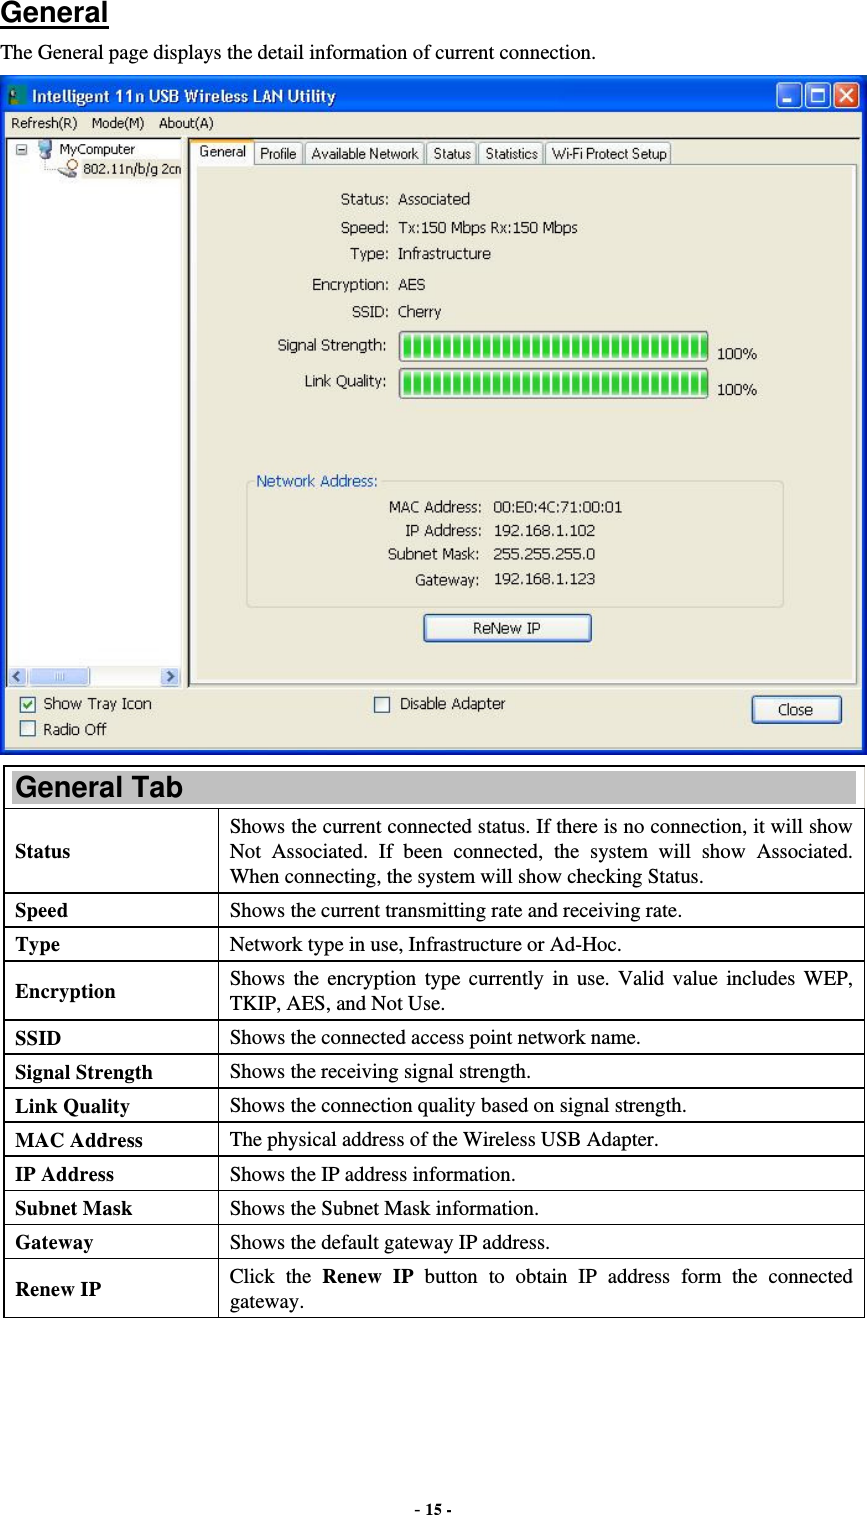  - 15 -  General The General page displays the detail information of current connection.  General Tab Status Shows the current connected status. If there is no connection, it will show Not Associated. If been connected, the system will show Associated. When connecting, the system will show checking Status. Speed  Shows the current transmitting rate and receiving rate. Type  Network type in use, Infrastructure or Ad-Hoc. Encryption  Shows the encryption type currently in use. Valid value includes WEP, TKIP, AES, and Not Use. SSID  Shows the connected access point network name. Signal Strength  Shows the receiving signal strength. Link Quality  Shows the connection quality based on signal strength. MAC Address  The physical address of the Wireless USB Adapter. IP Address  Shows the IP address information. Subnet Mask  Shows the Subnet Mask information. Gateway  Shows the default gateway IP address. Renew IP  Click the Renew IP button to obtain IP address form the connected gateway. 